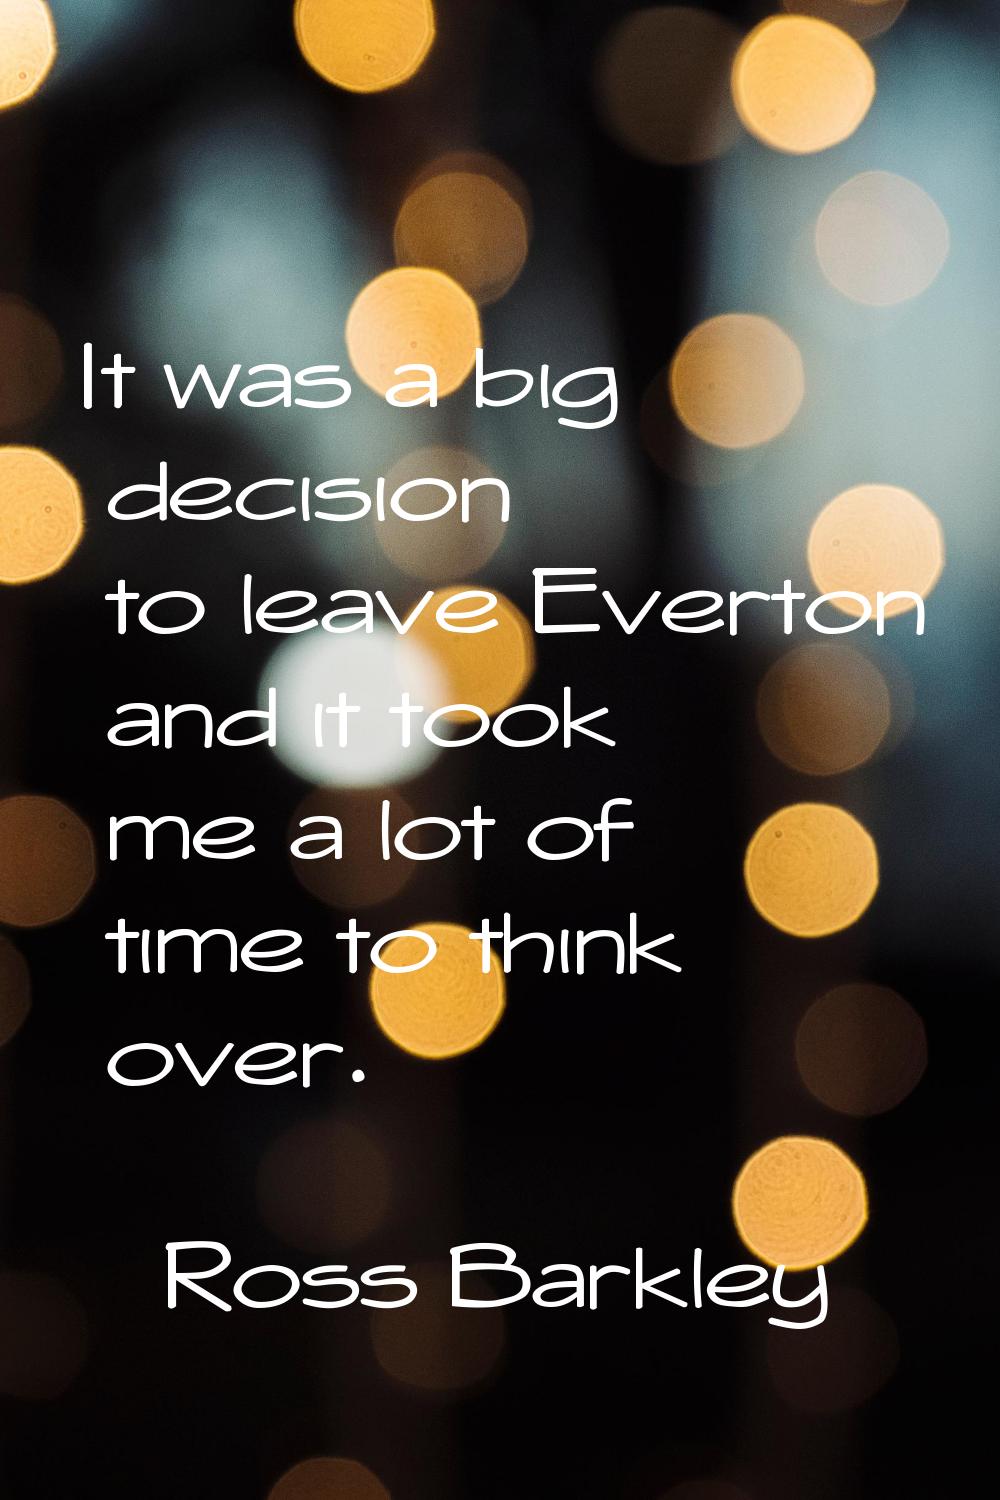 It was a big decision to leave Everton and it took me a lot of time to think over.